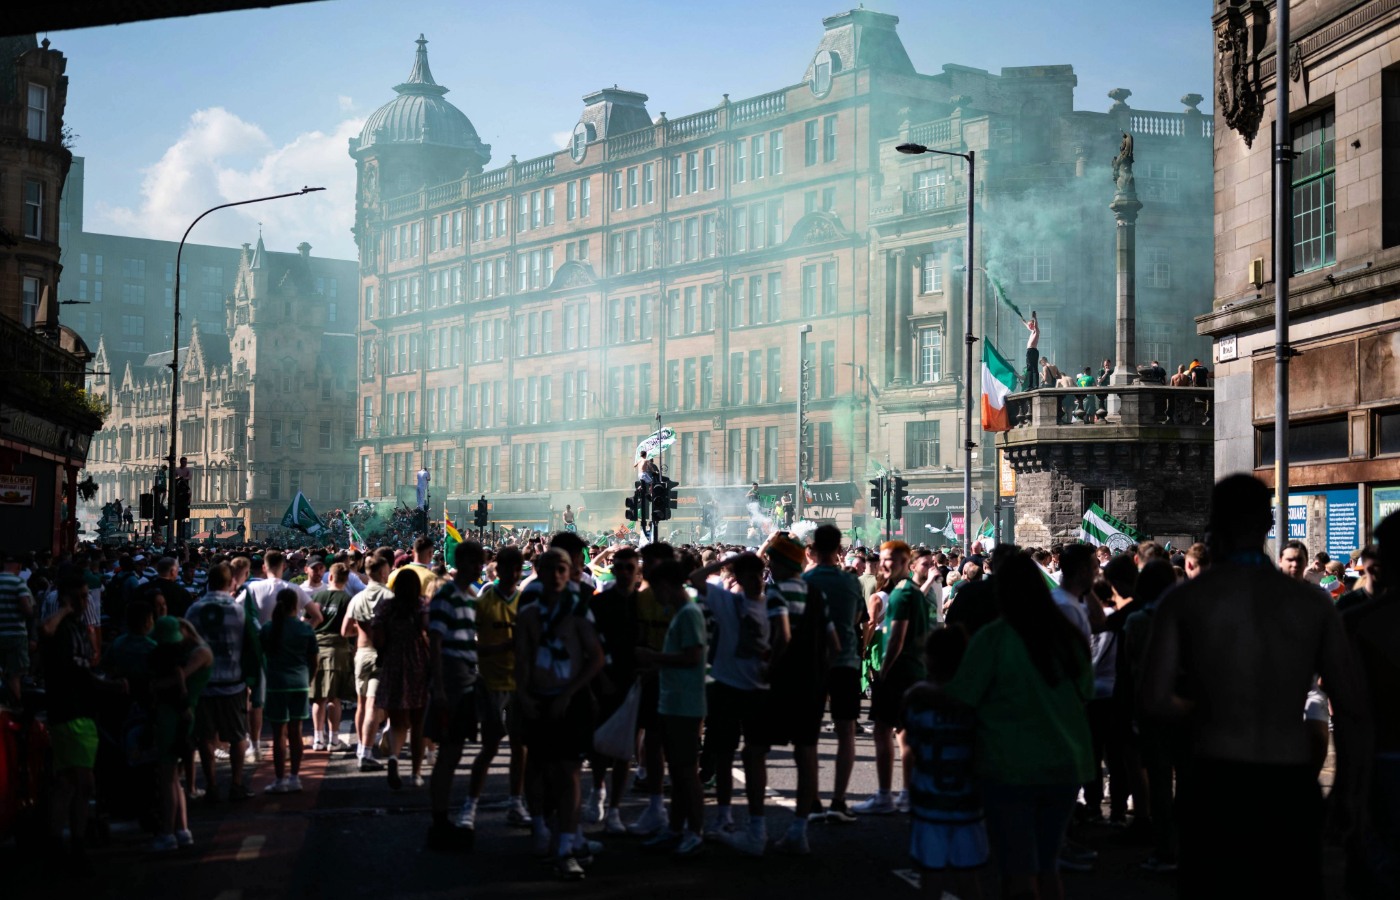 Around 25,000 people gathered in Merchant City, Glasgow on Saturday to celebrate Celtic winning the Scottish Premiership title.